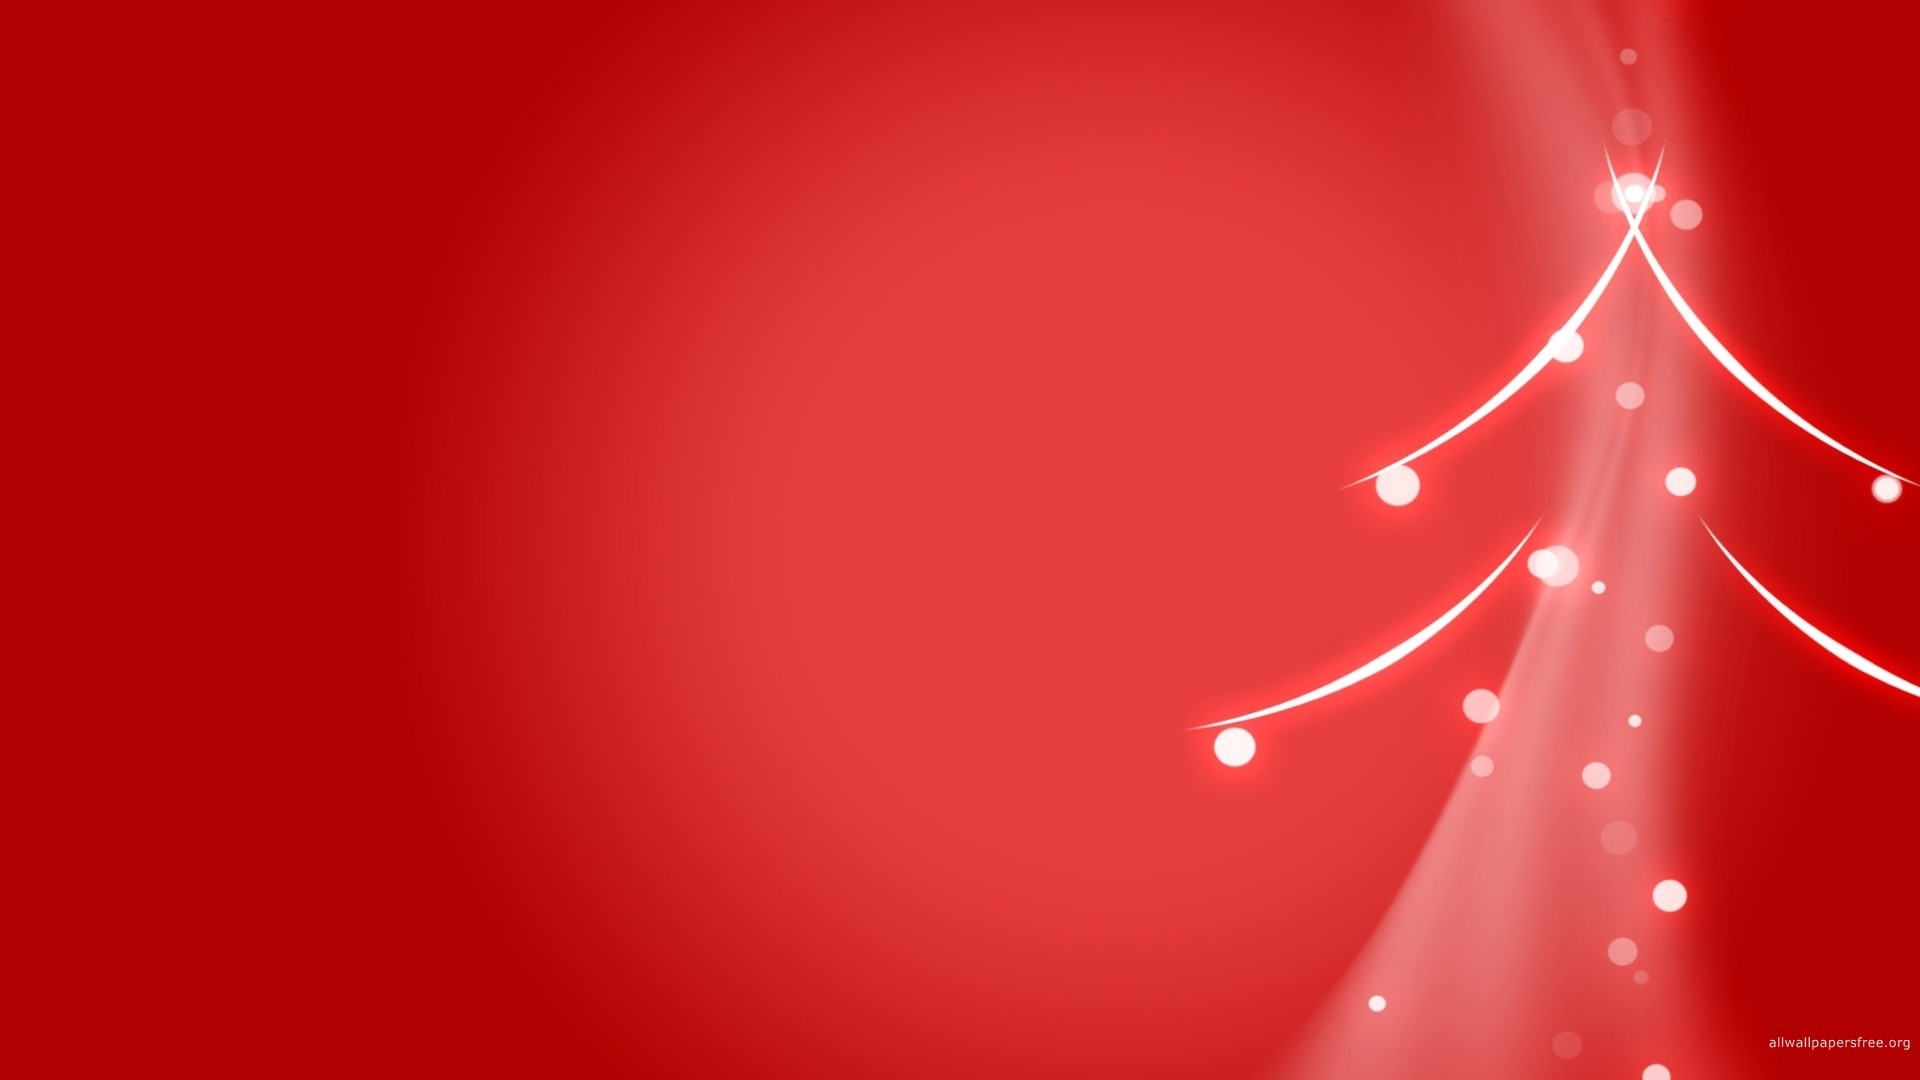 1920x1080 Red sparkling wallpaper. 60